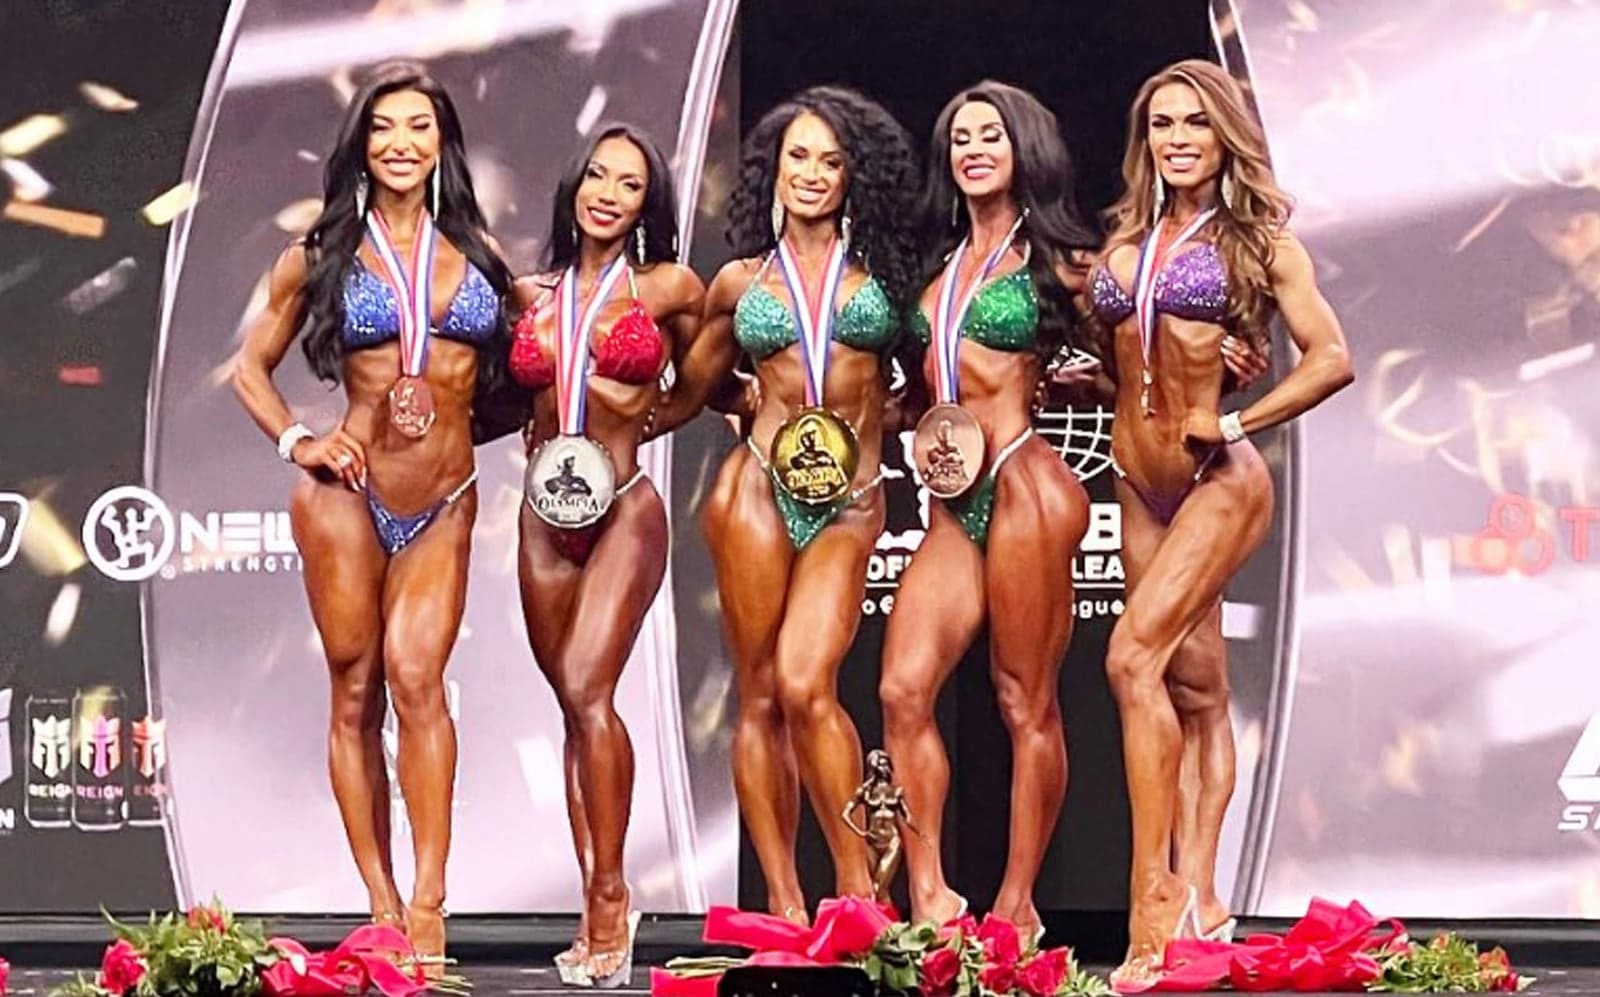 How Bodybuilding is Judged, Different Divisions, and Scoring